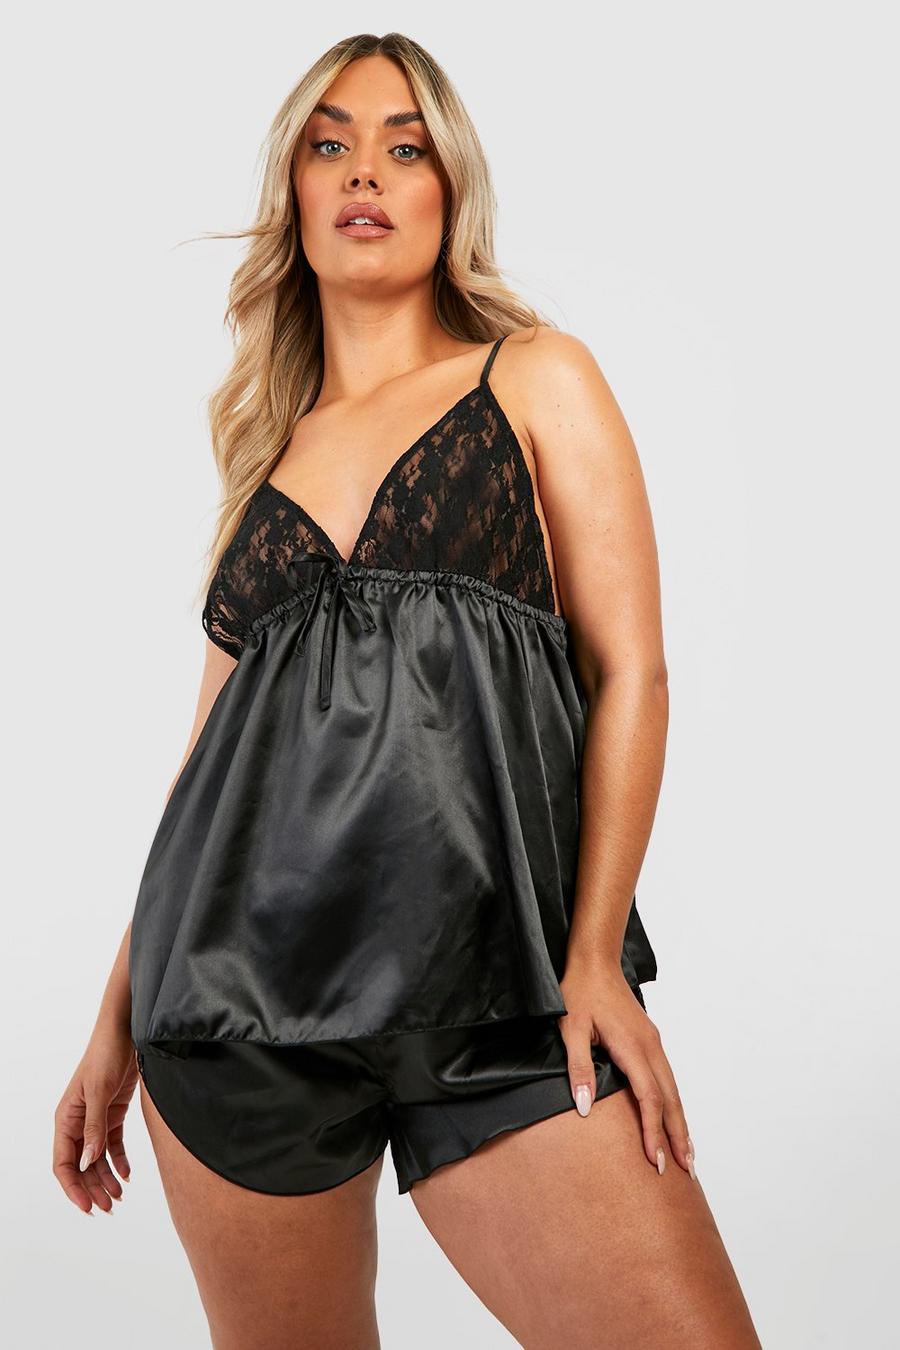 Black Plus Satin And Lace Teddy Top And Shorts Pajama Set